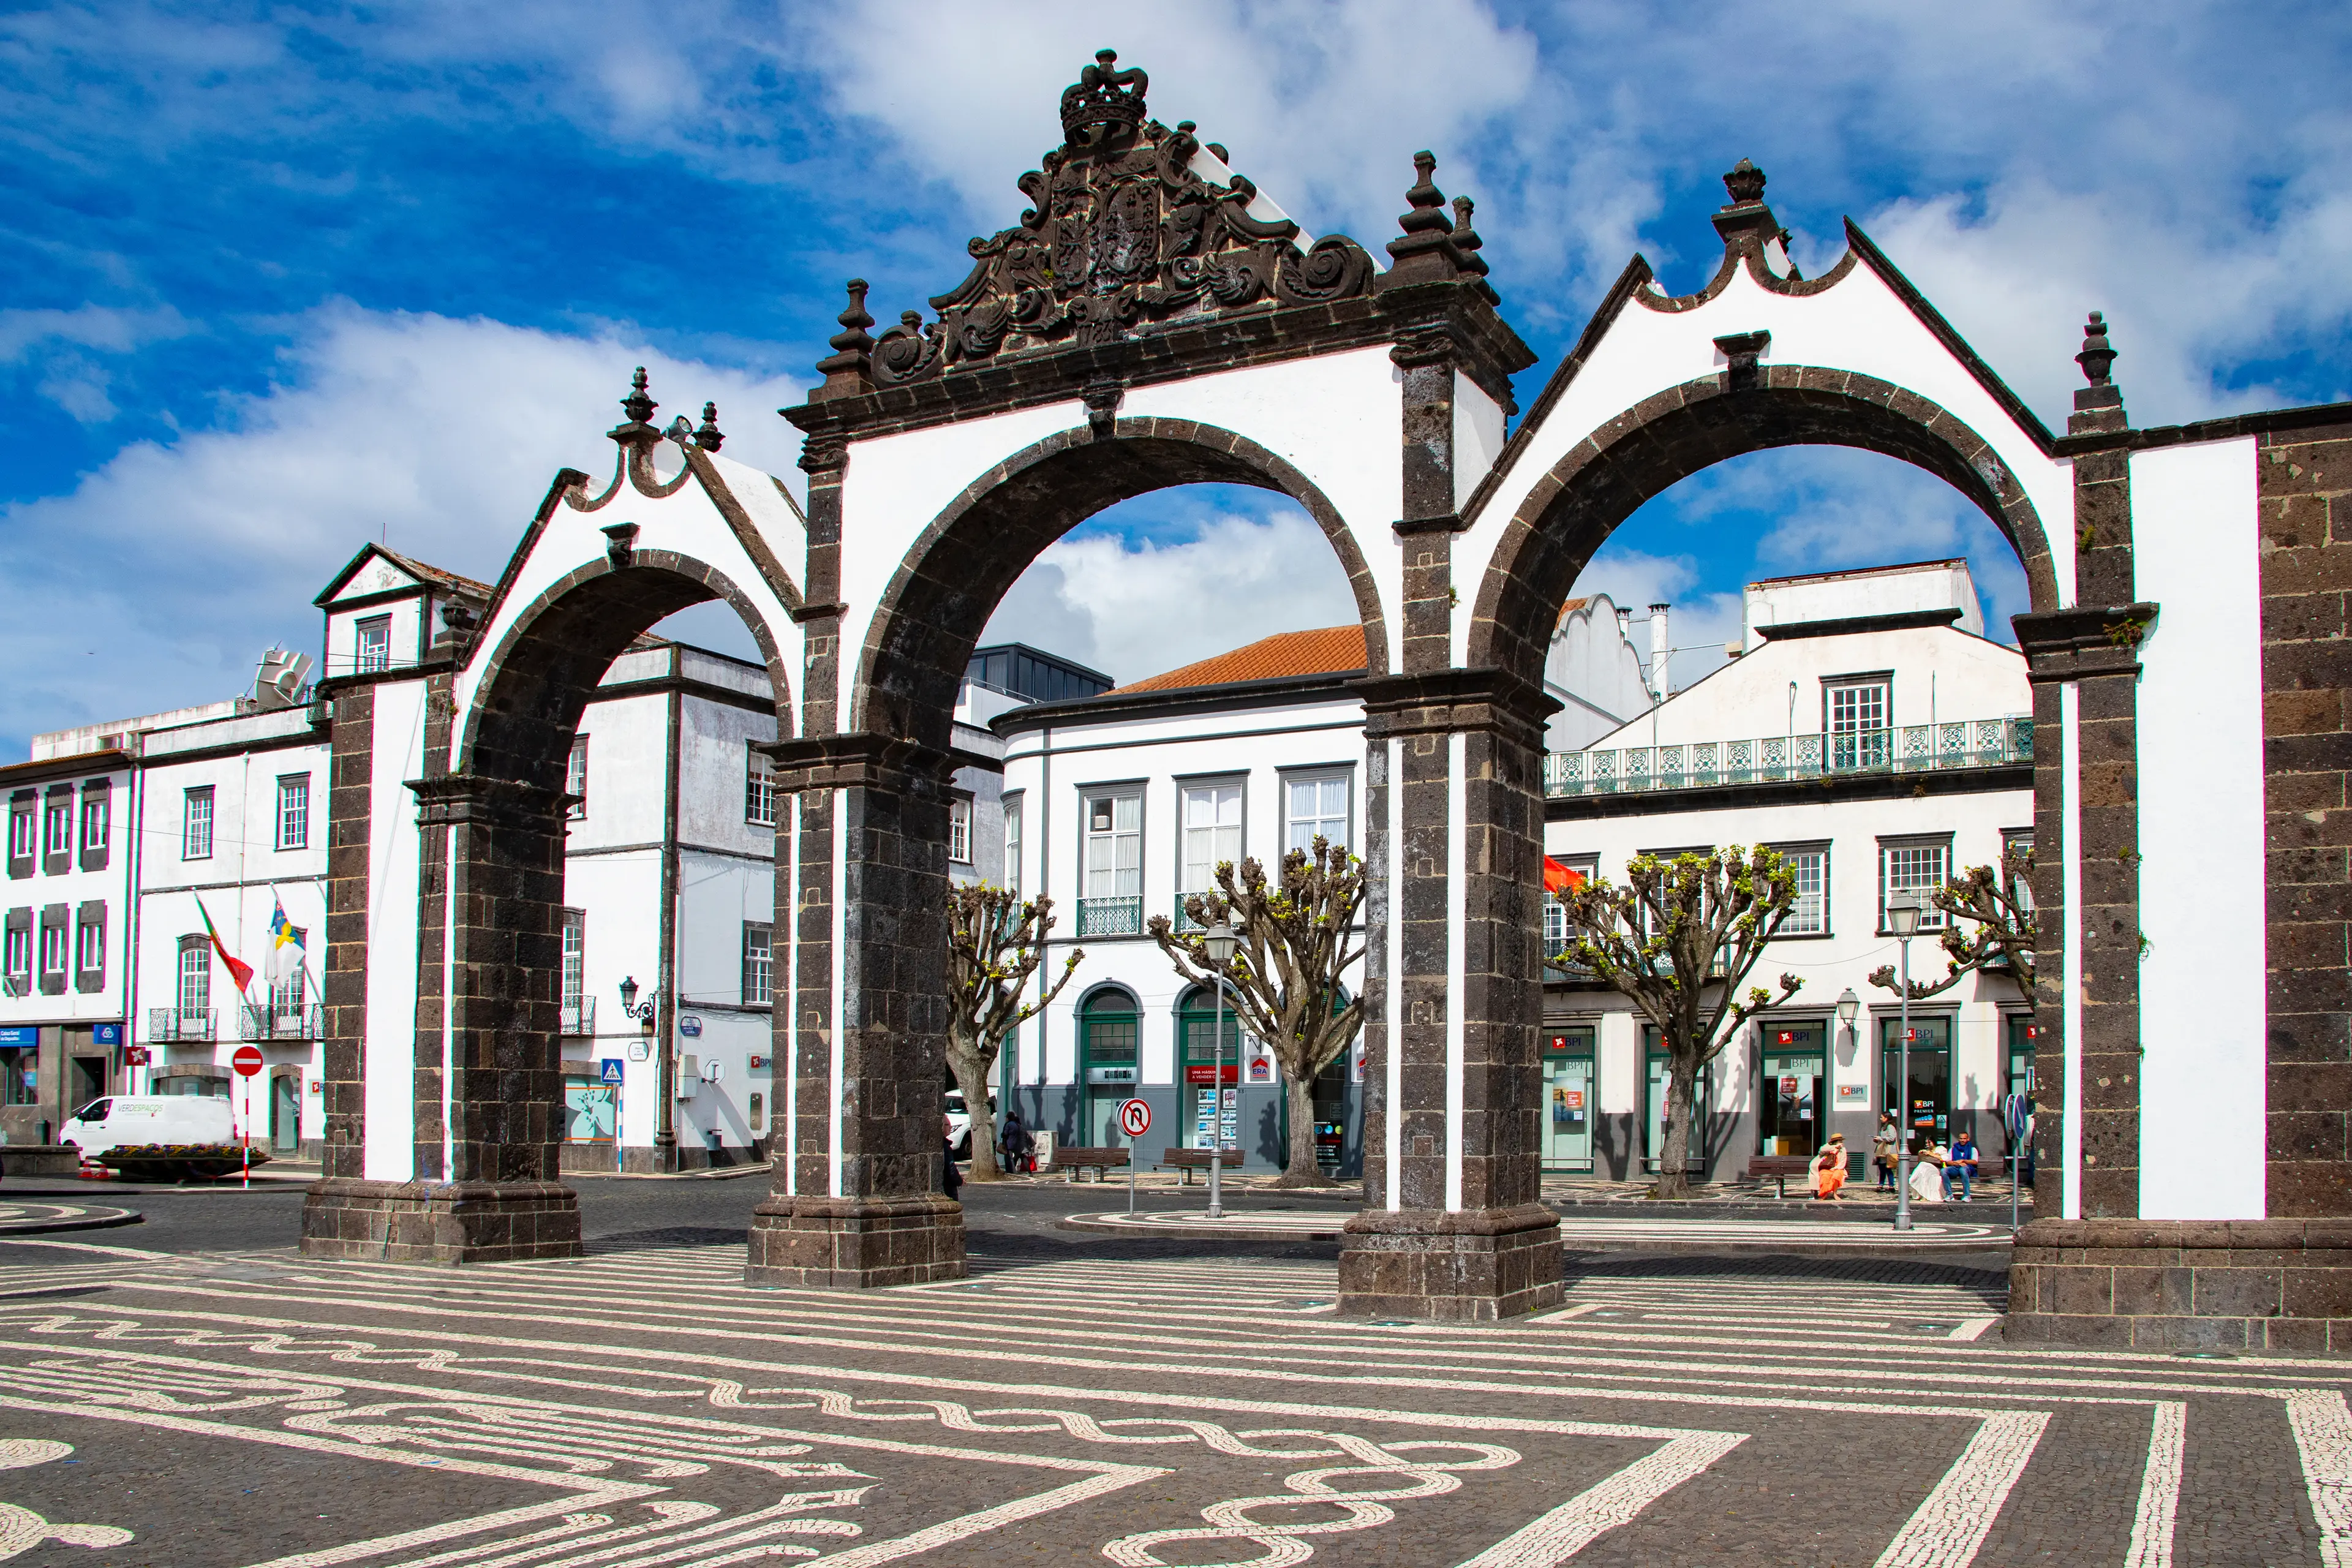 2-Day Adventure Itinerary for Azores, Portugal